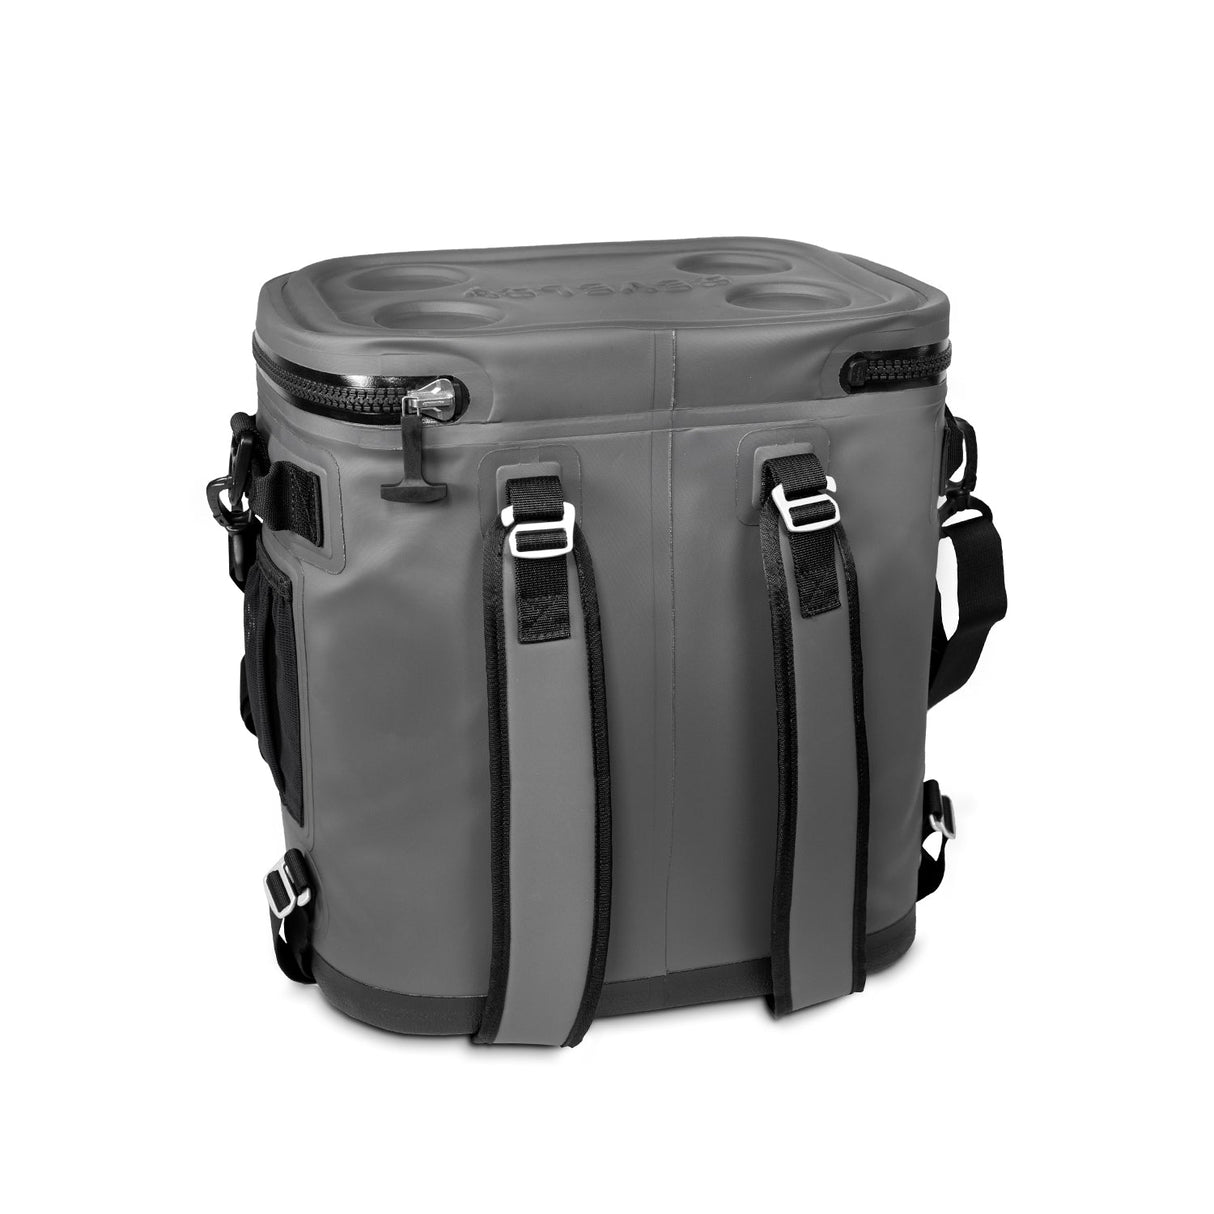 Revelry The Nomad 24 Watertight Cooler